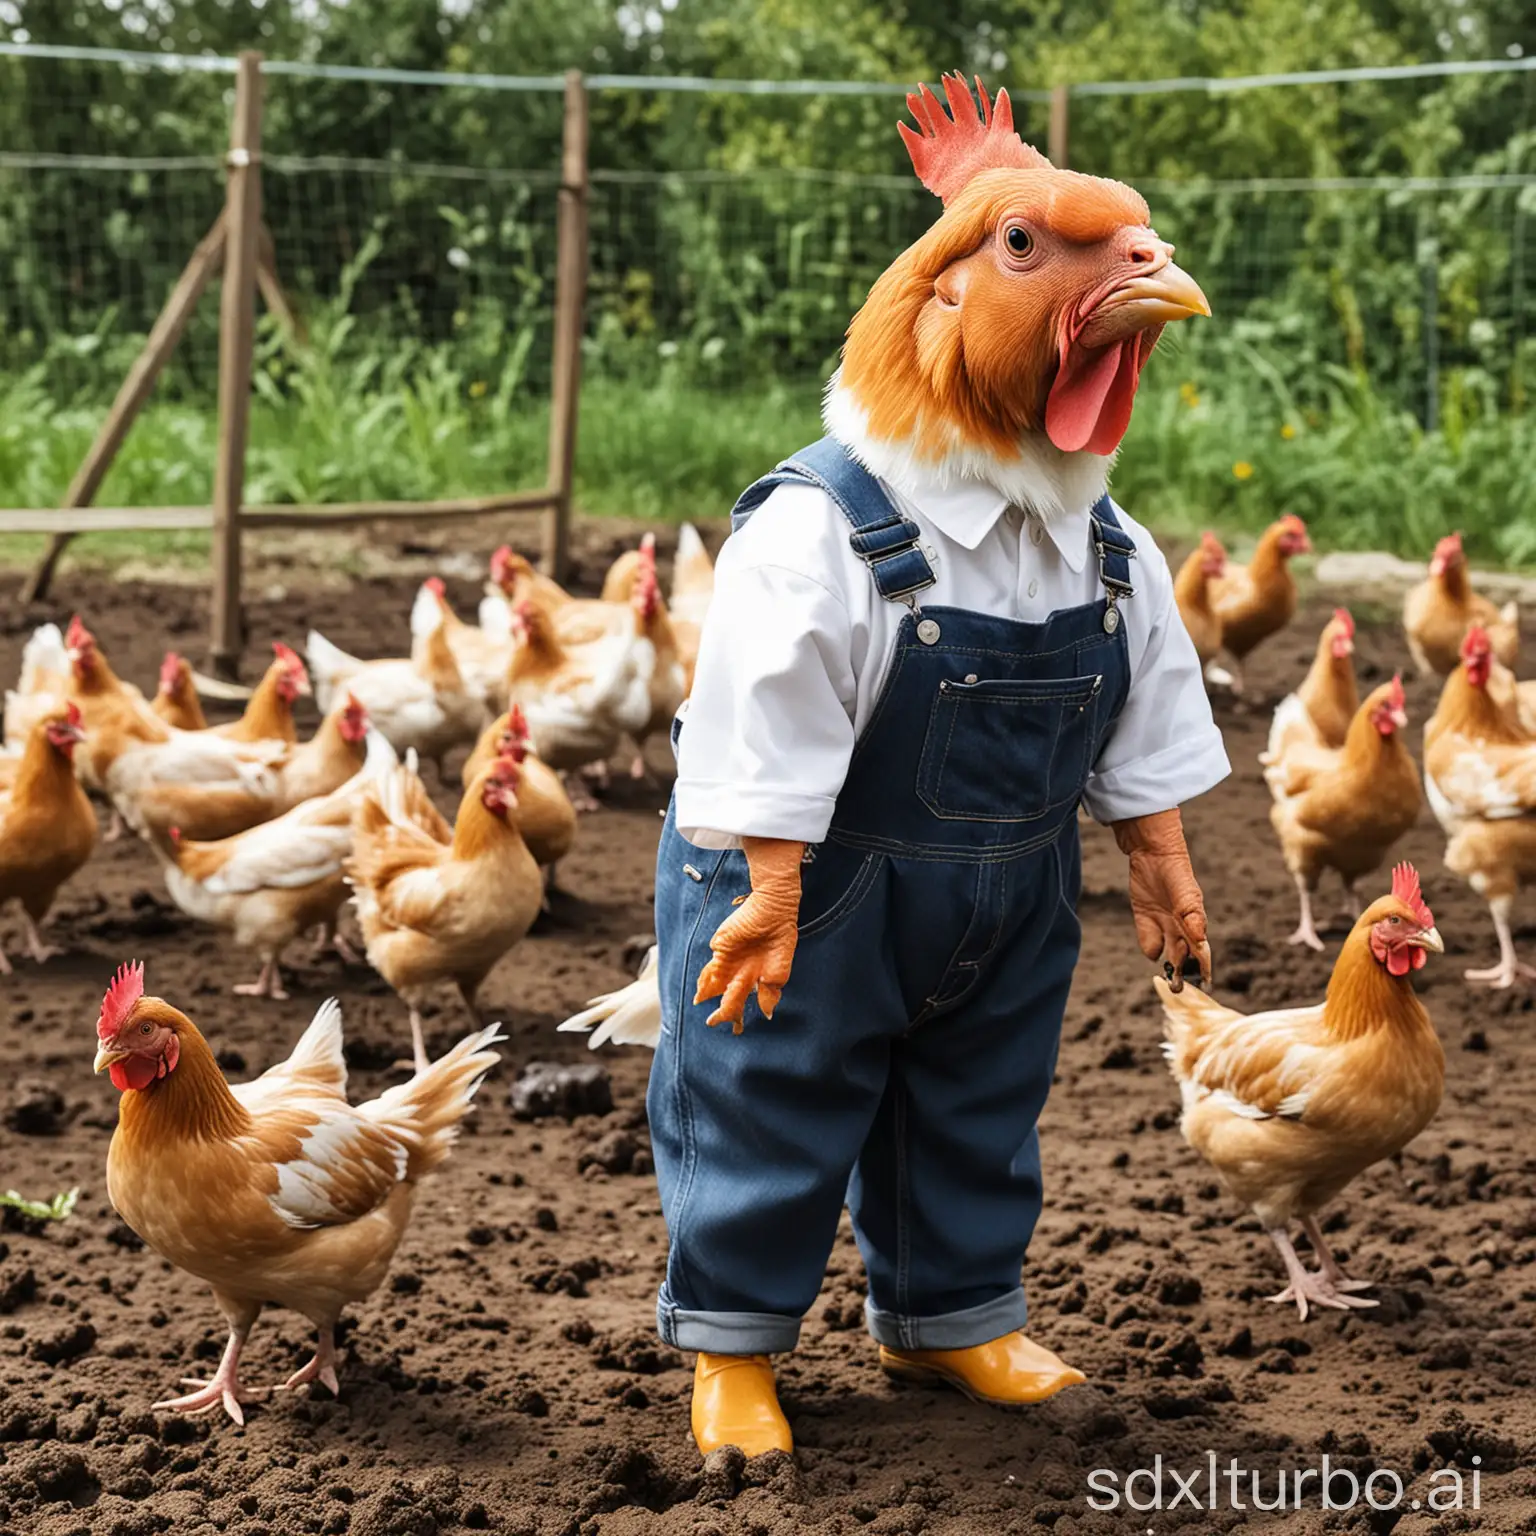 Fish wearing overalls feed chickens